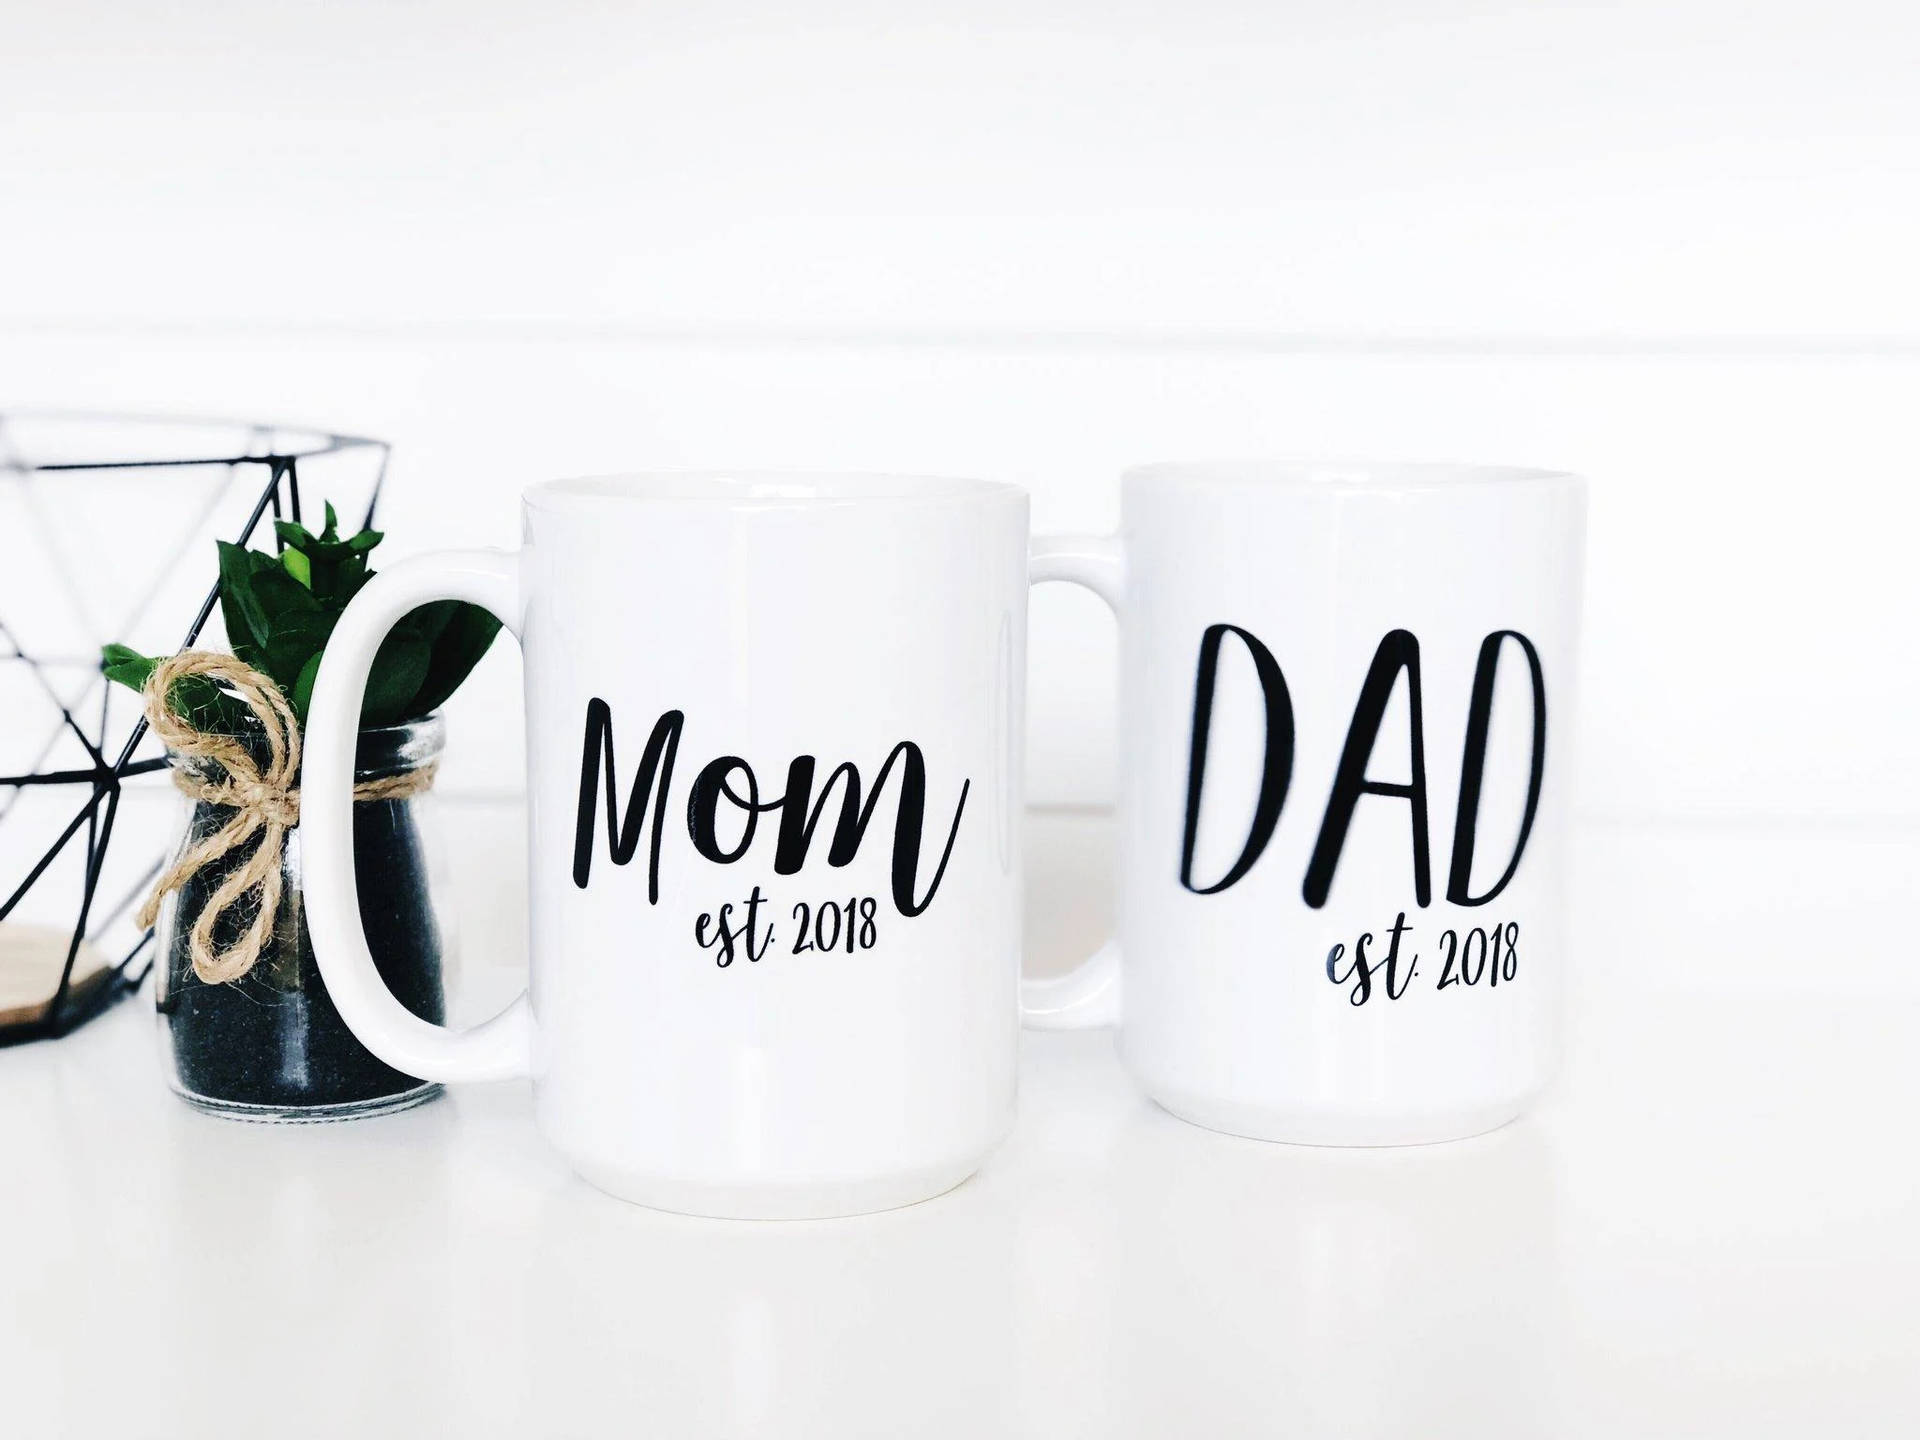 Mom And Dad Mugs Background